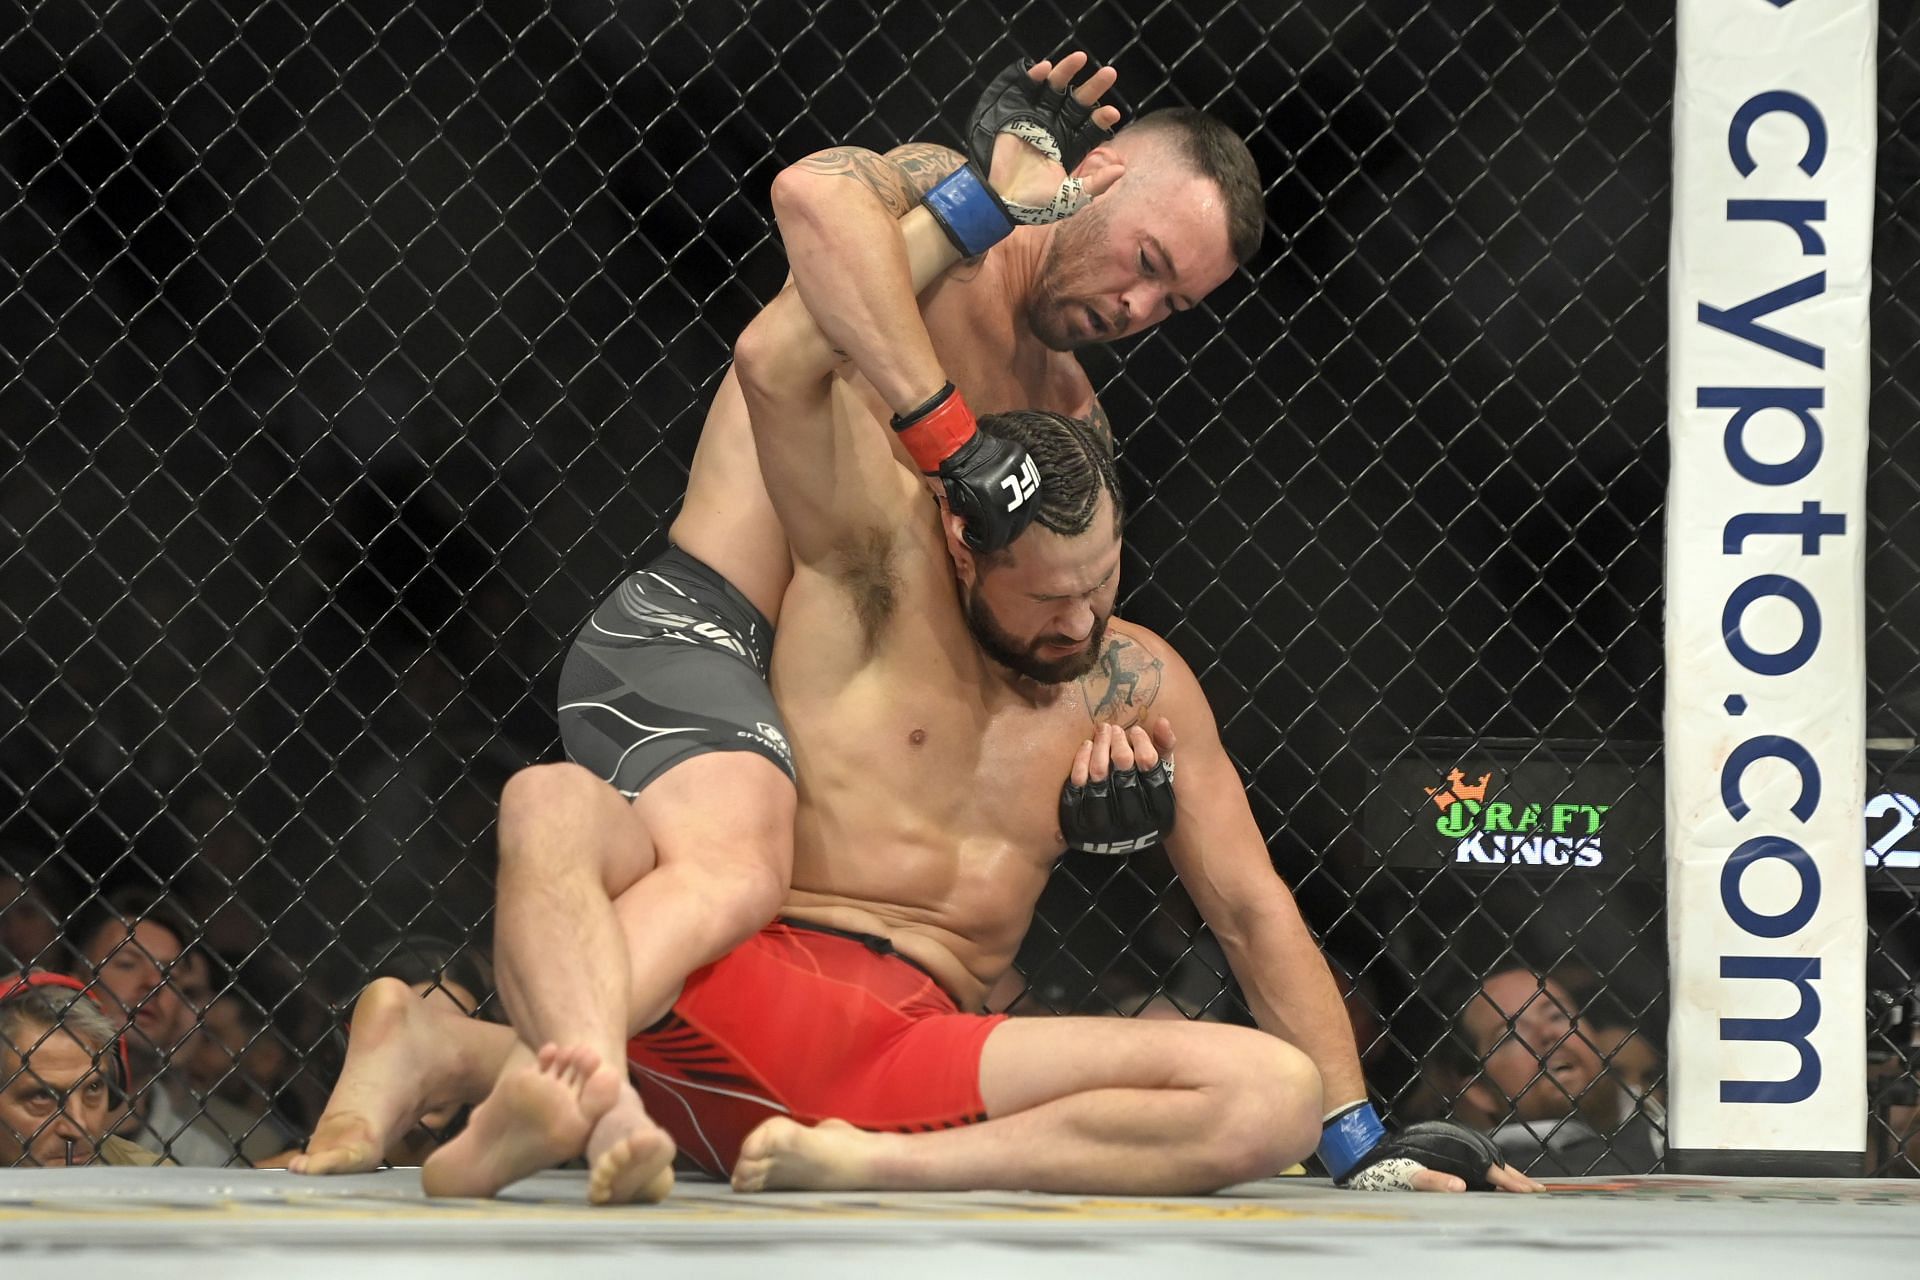 Colby Covington defeated Jorge Masvidal by unanimous decision in the main event